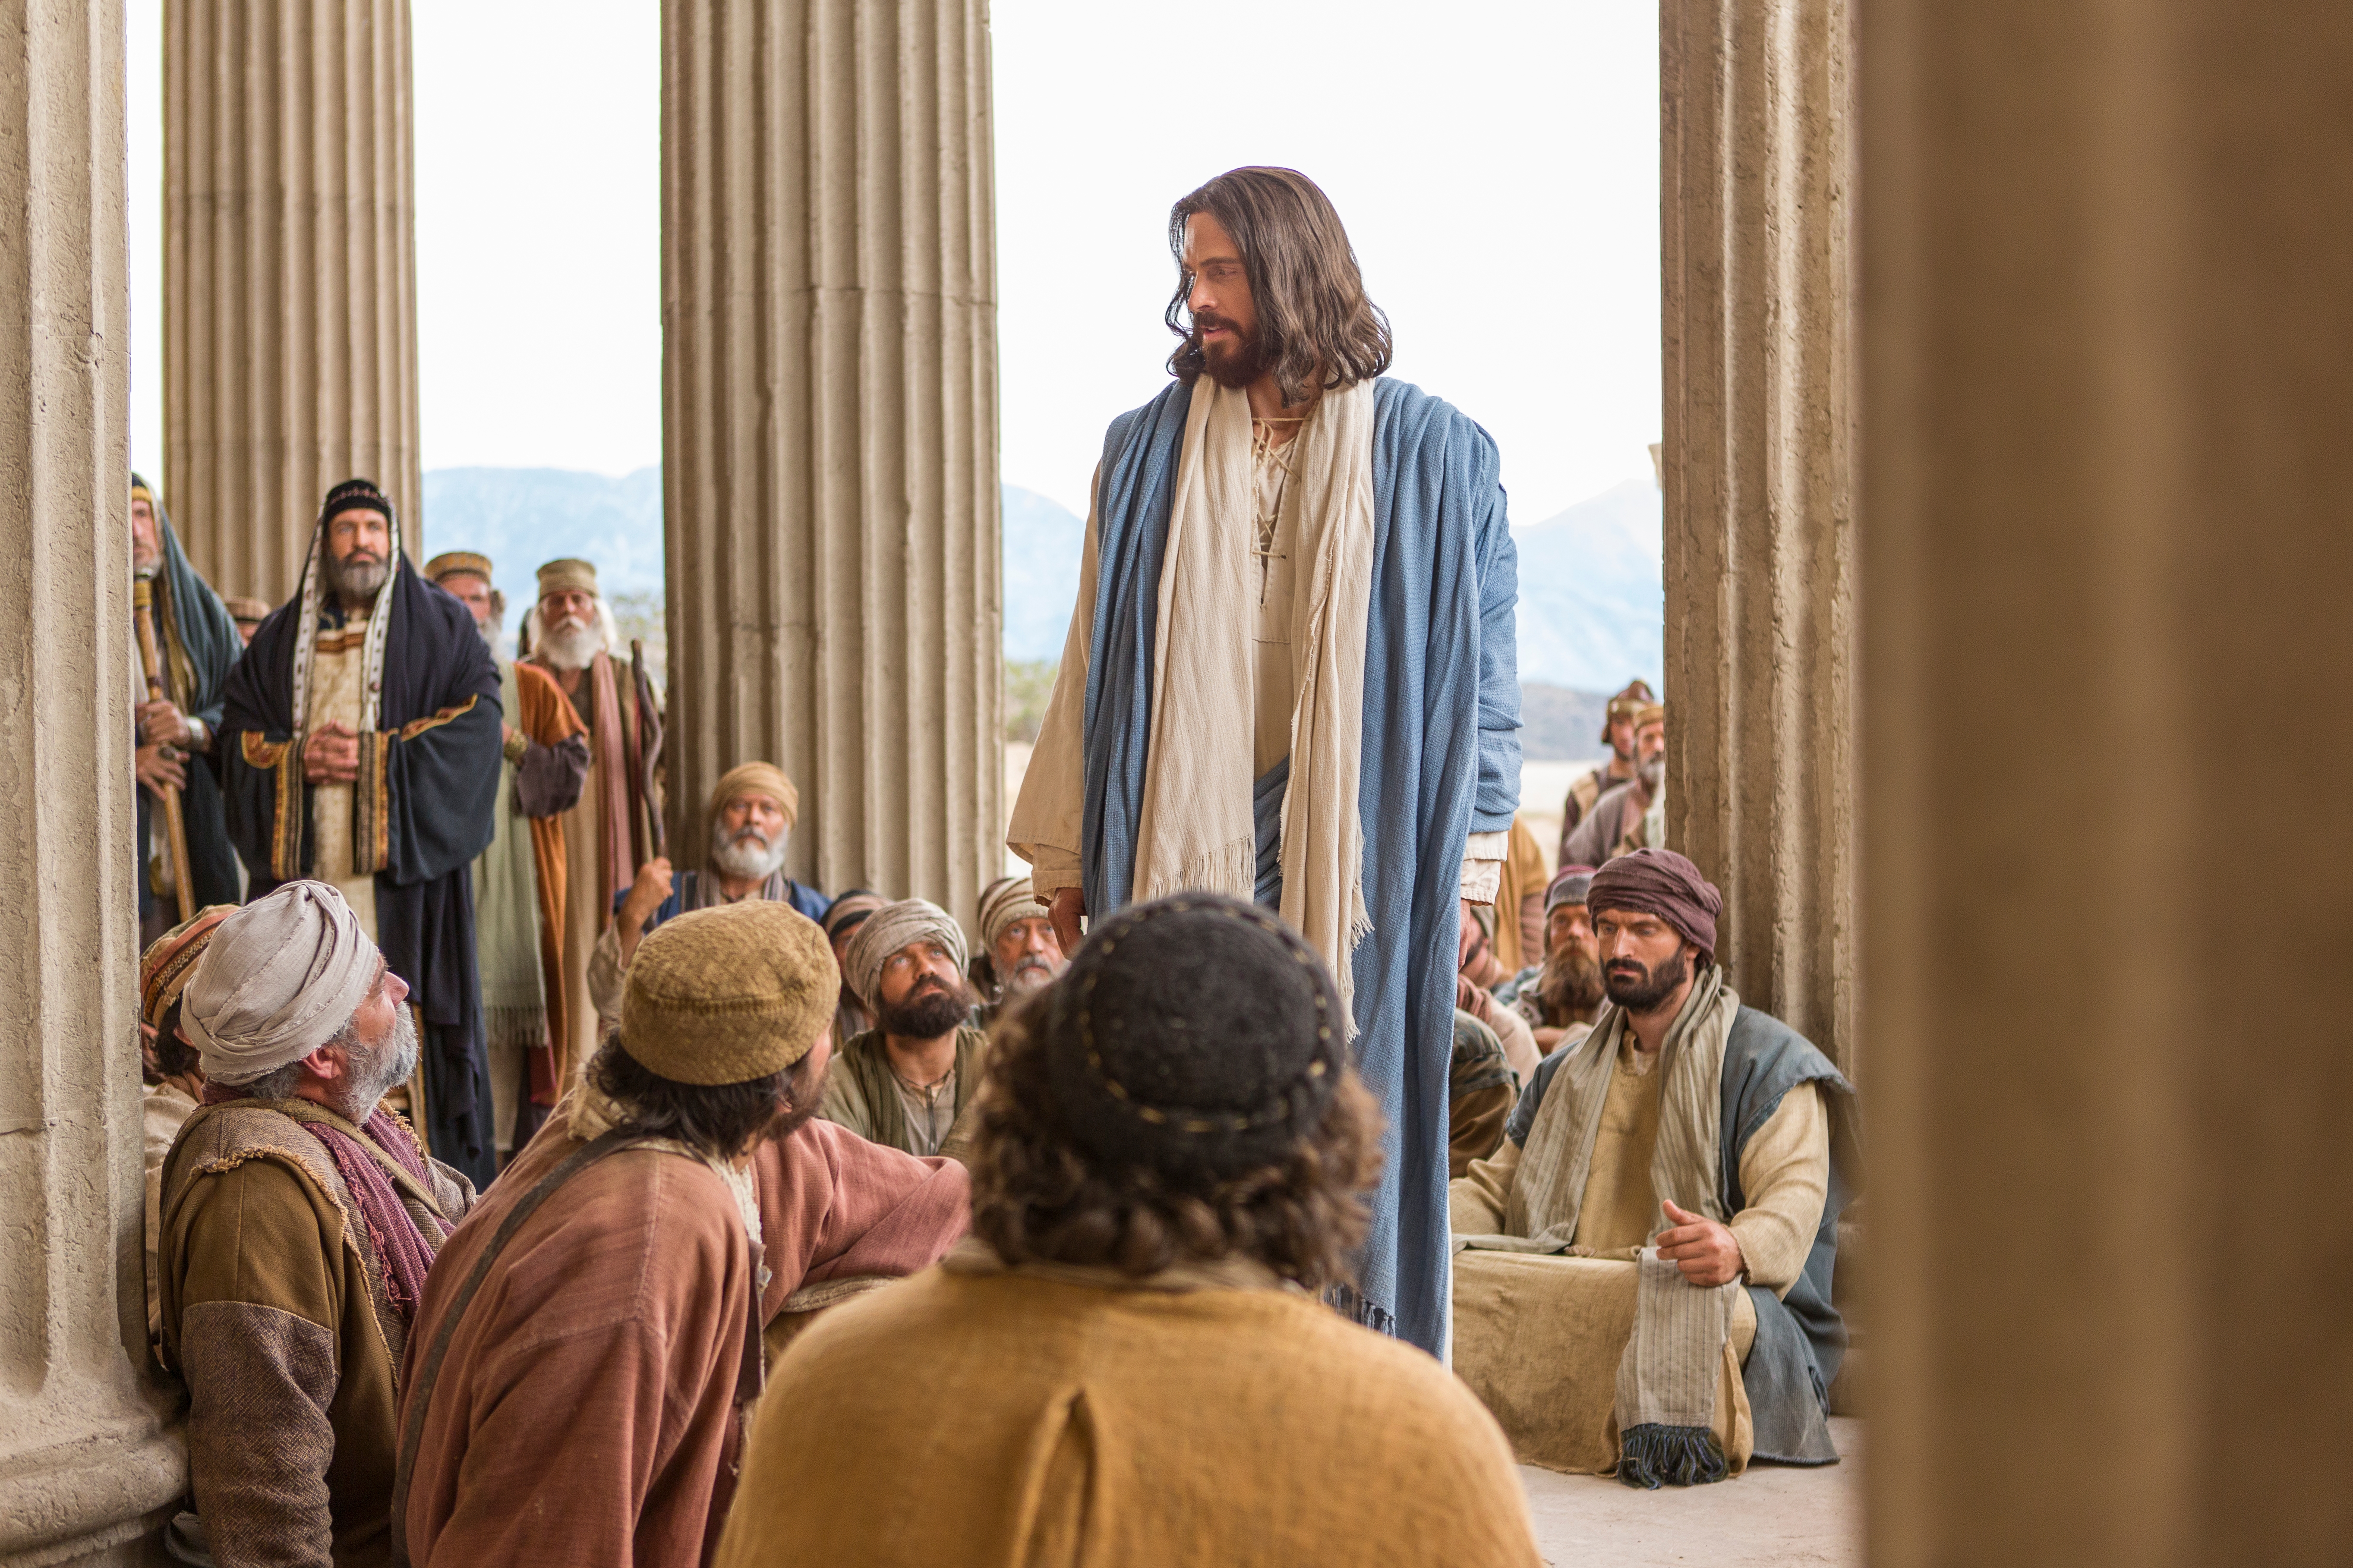 Jesus Christ is teaching in the temple and being approached by the chief priests, elders and scribes who ask Him the source of his authority.  Christ questions them whether the baptism of John the Baptist was of heaven or of man. Outtakes include closeups of people in the crowd and of Caiaphas.